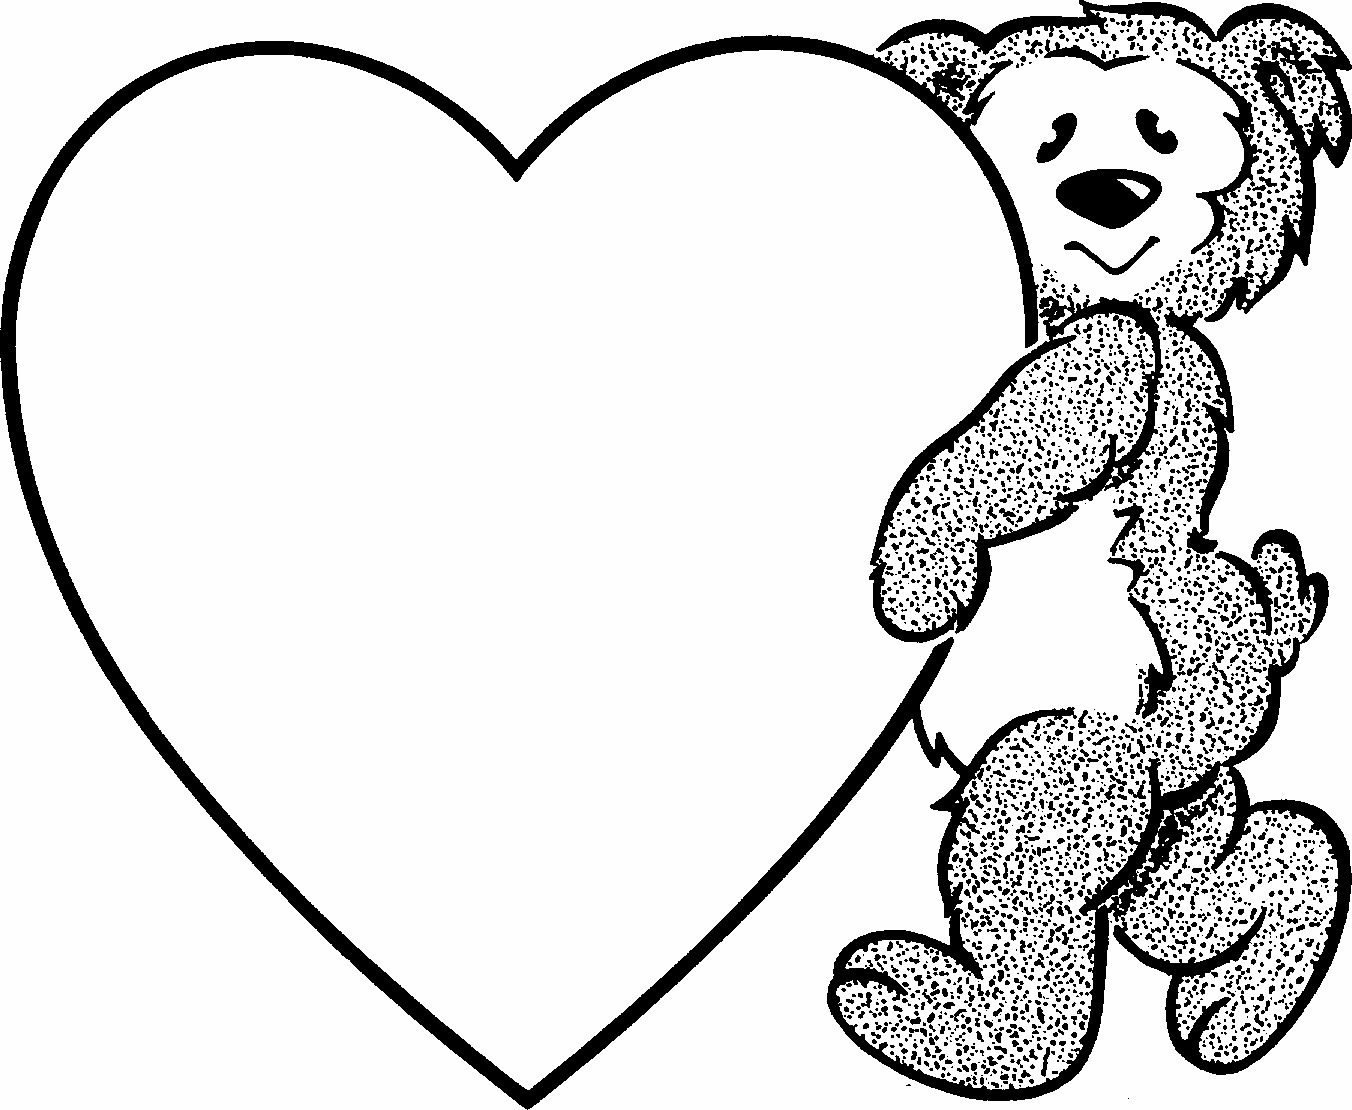 Hearts Shapes - ClipArt Best